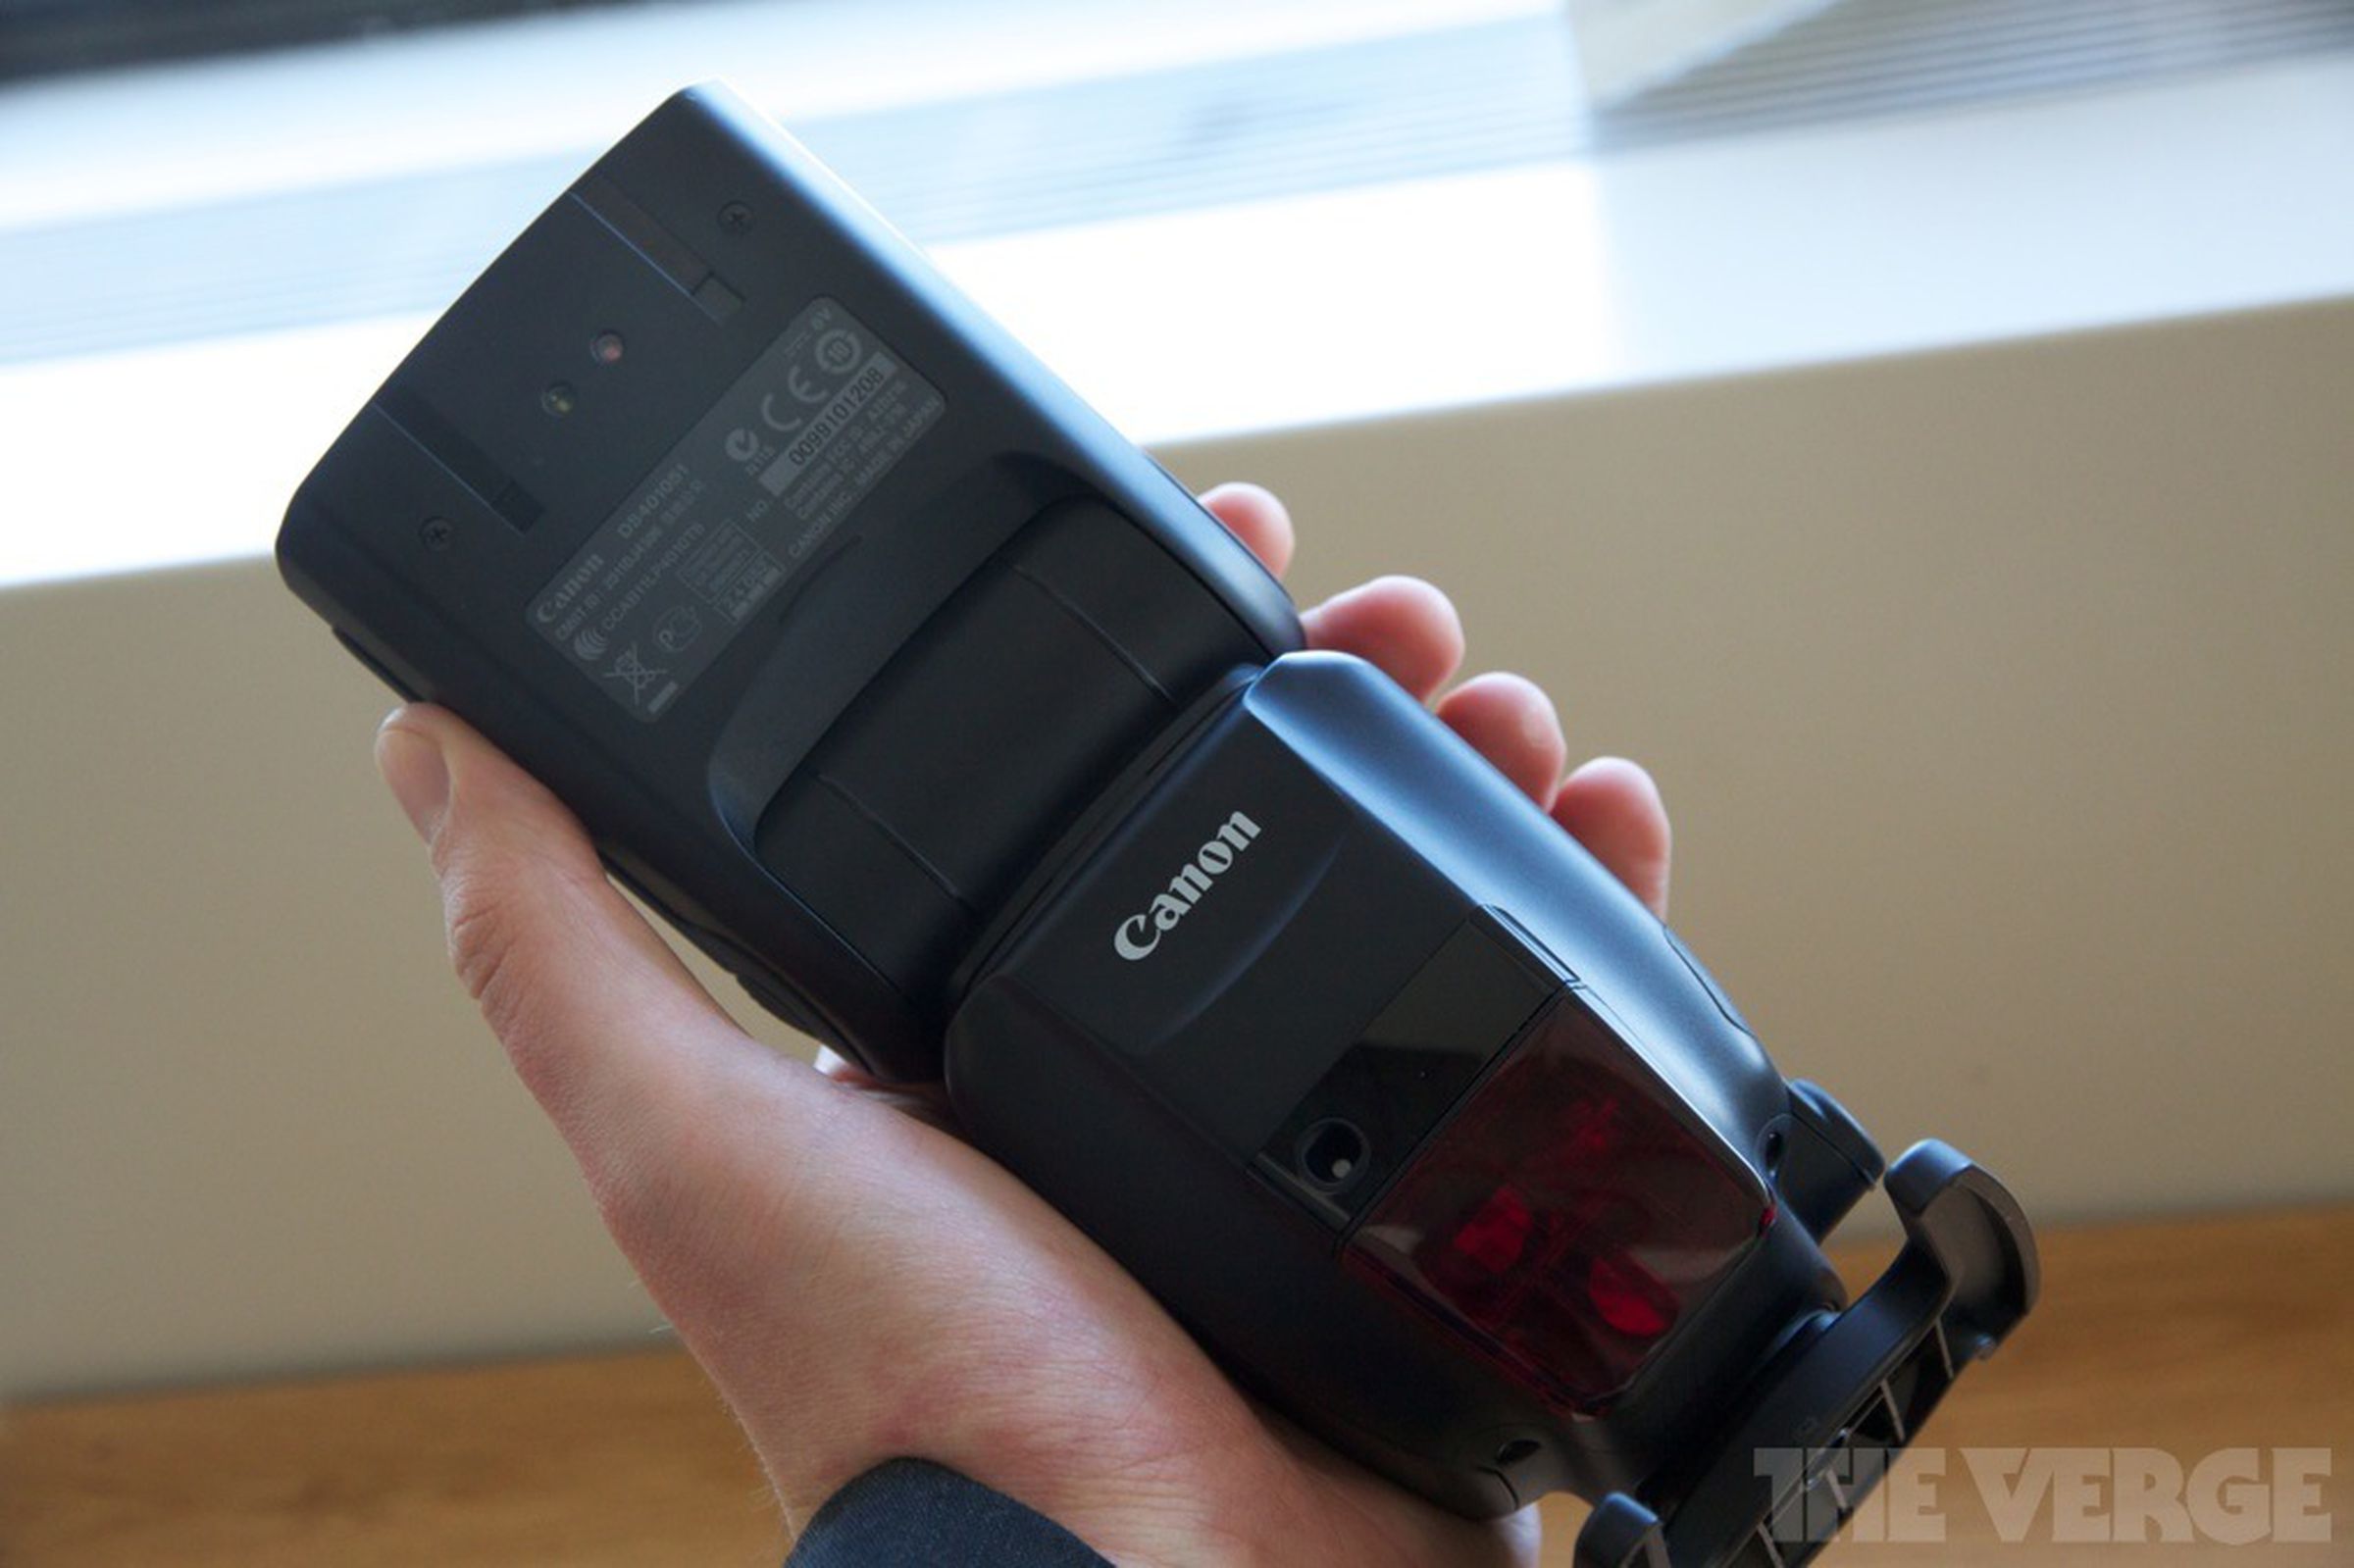 Canon's new accessories (hands-on photos)